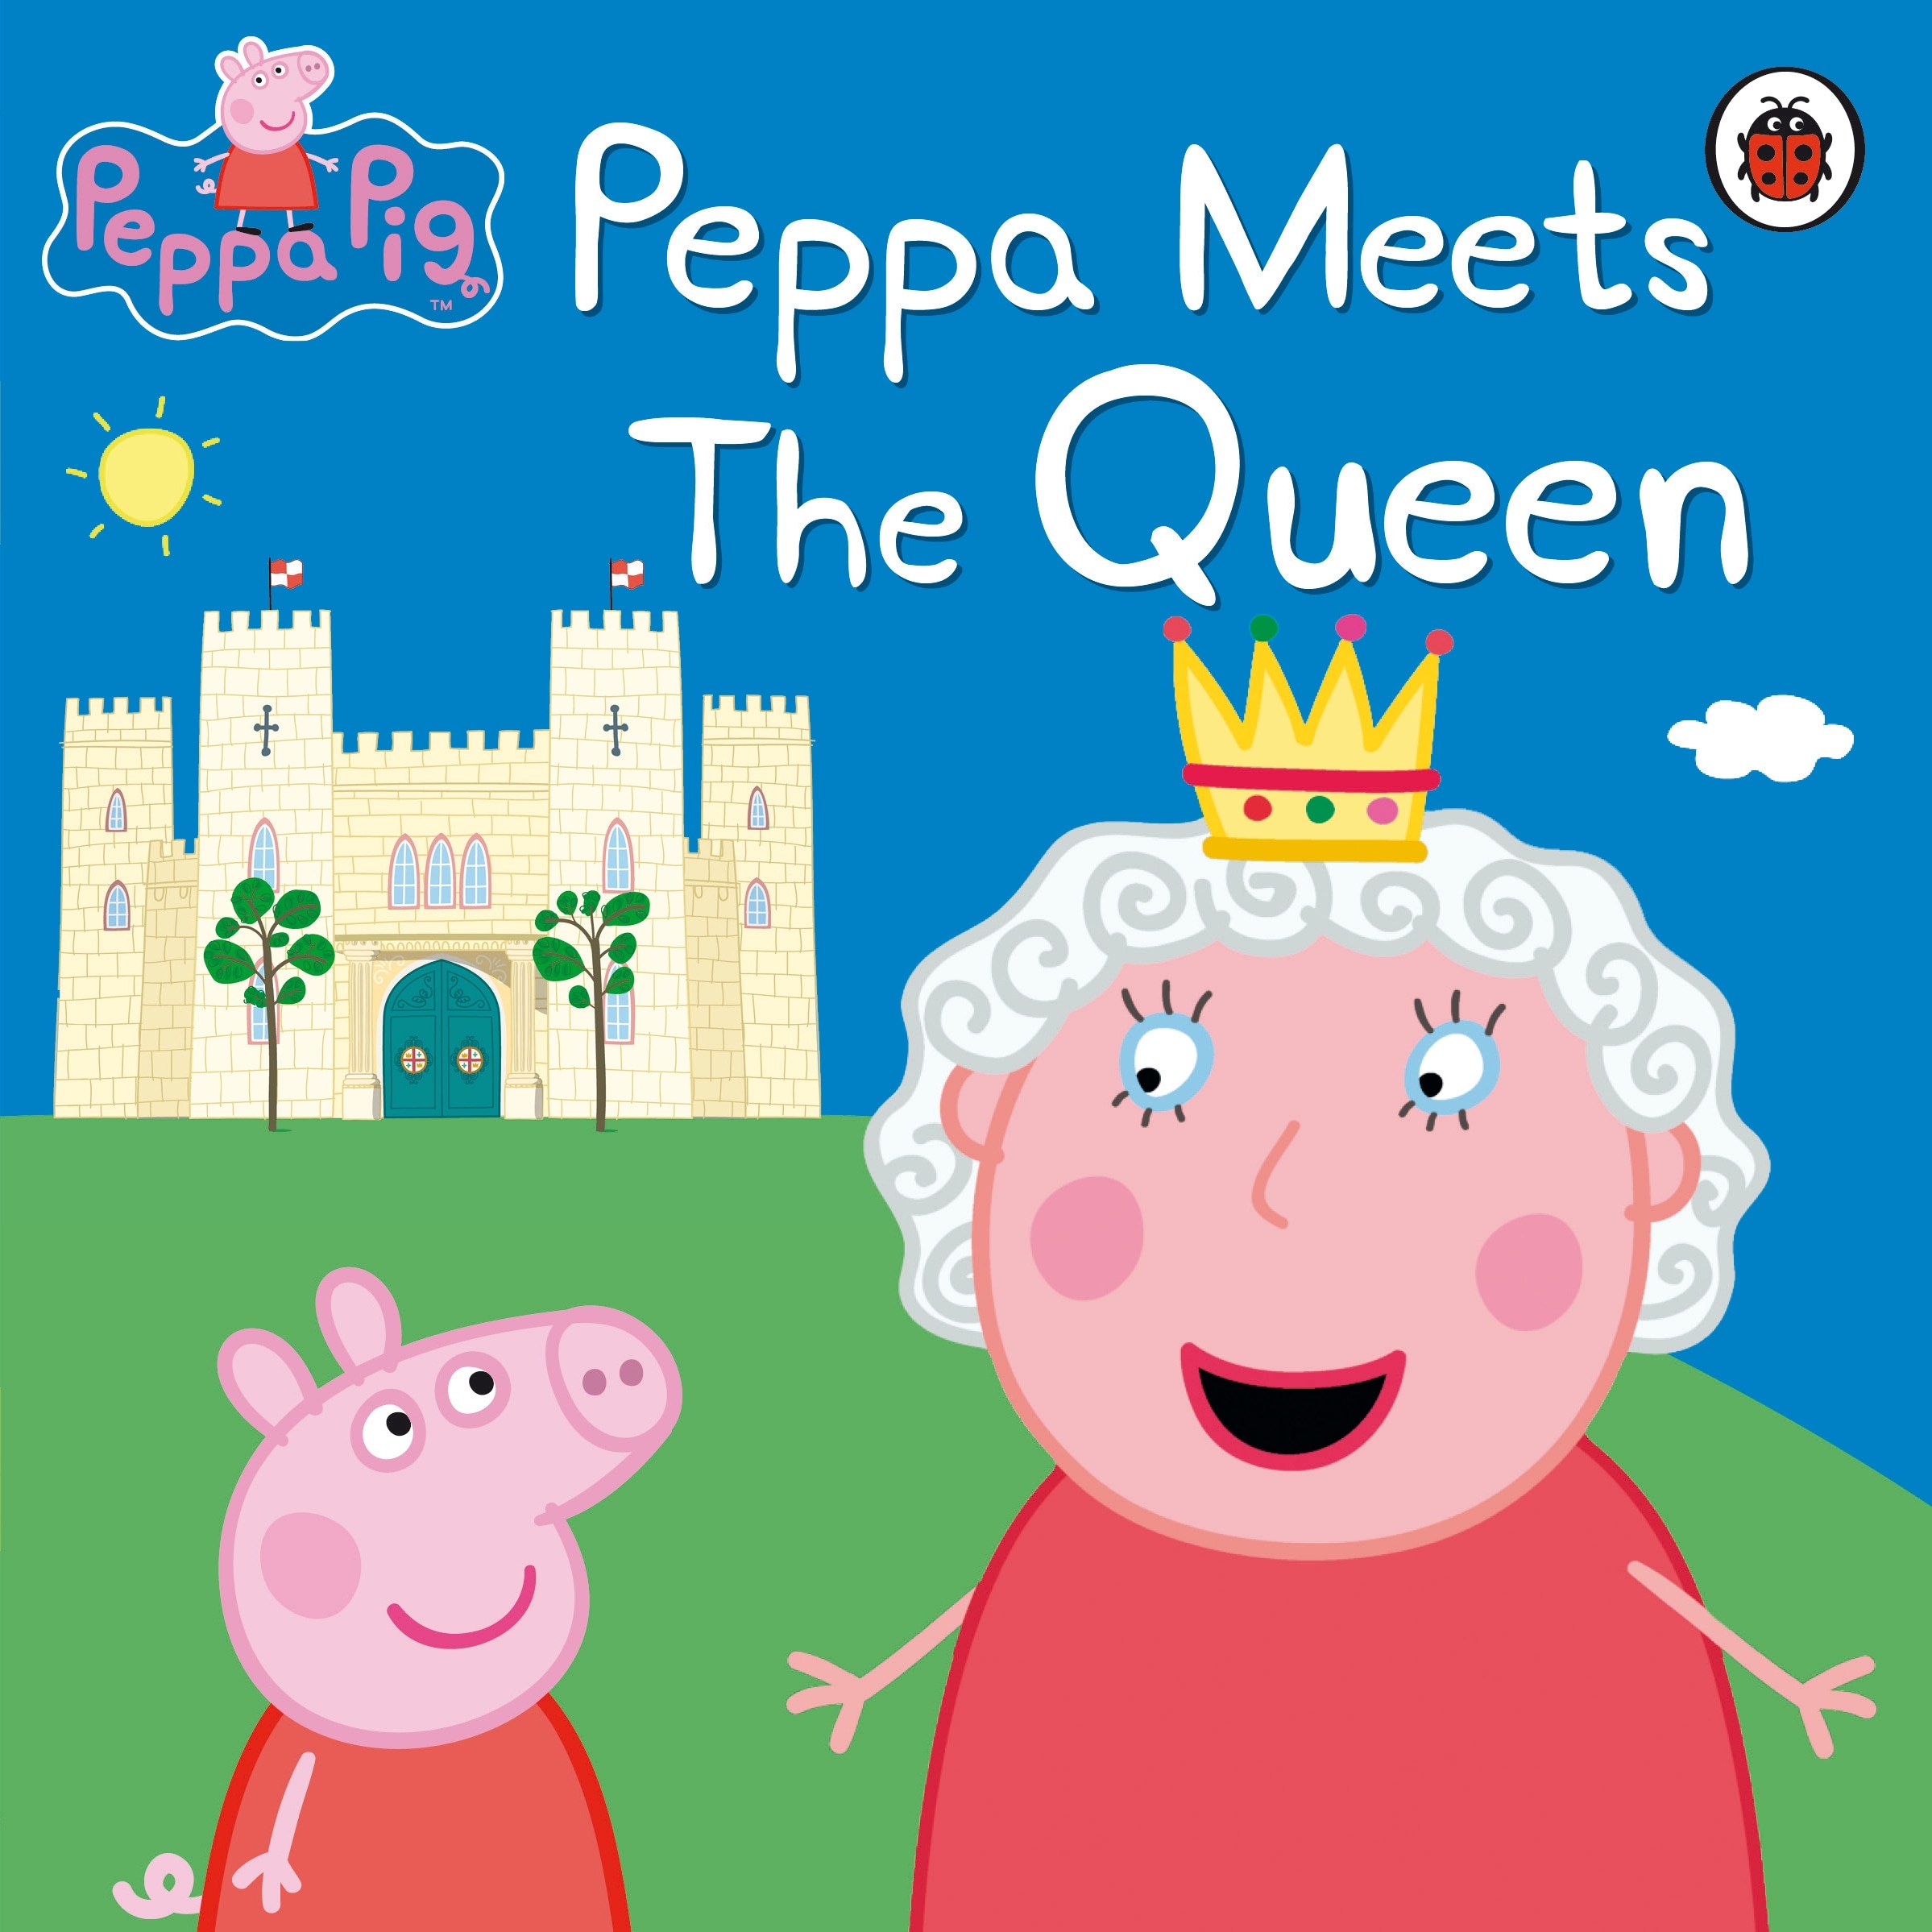 Book “Peppa Pig: Peppa Meets the Queen” by Peppa Pig — May 3, 2012